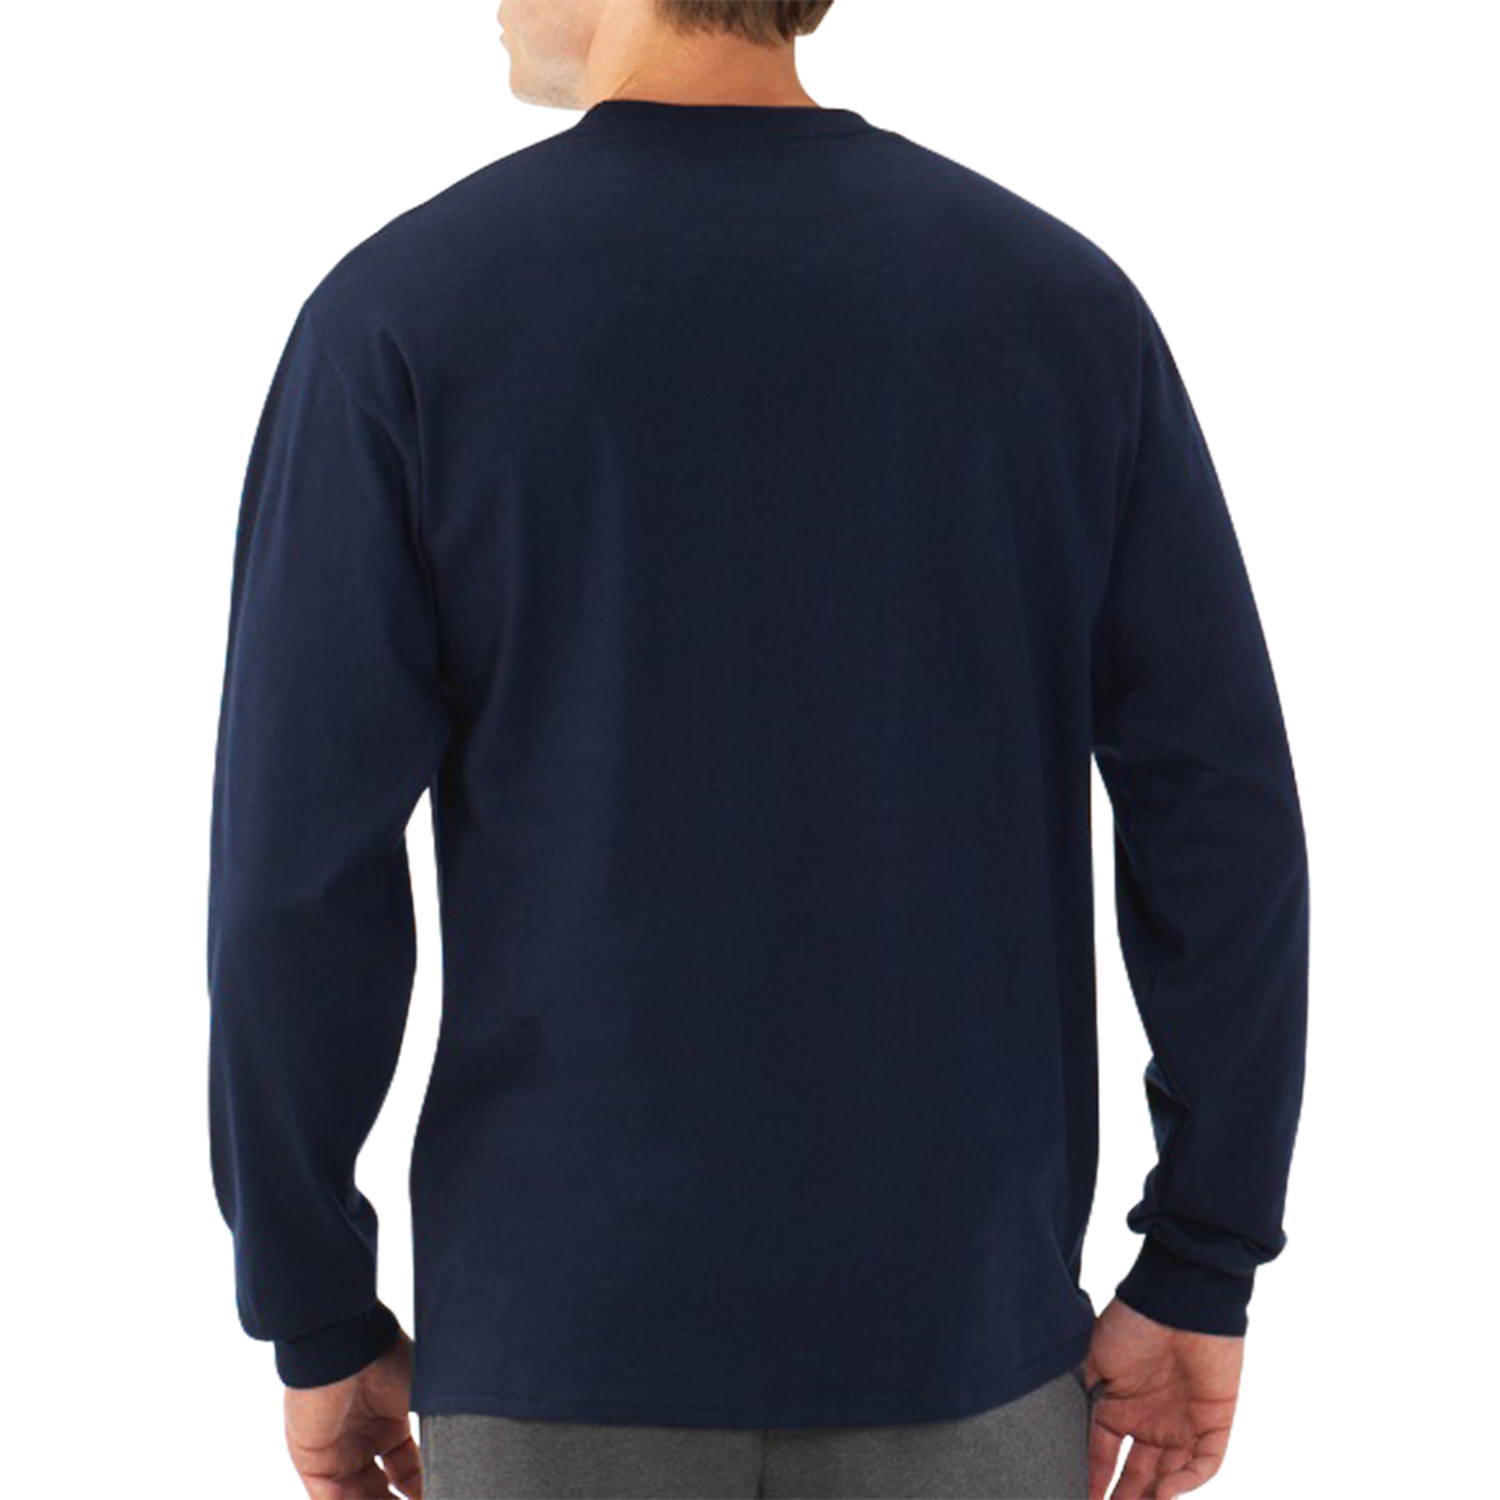 Fruit of the Loom Men's Platinum EverSoft Long Sleeve T-Shirt, Available up to size 4X - image 3 of 6